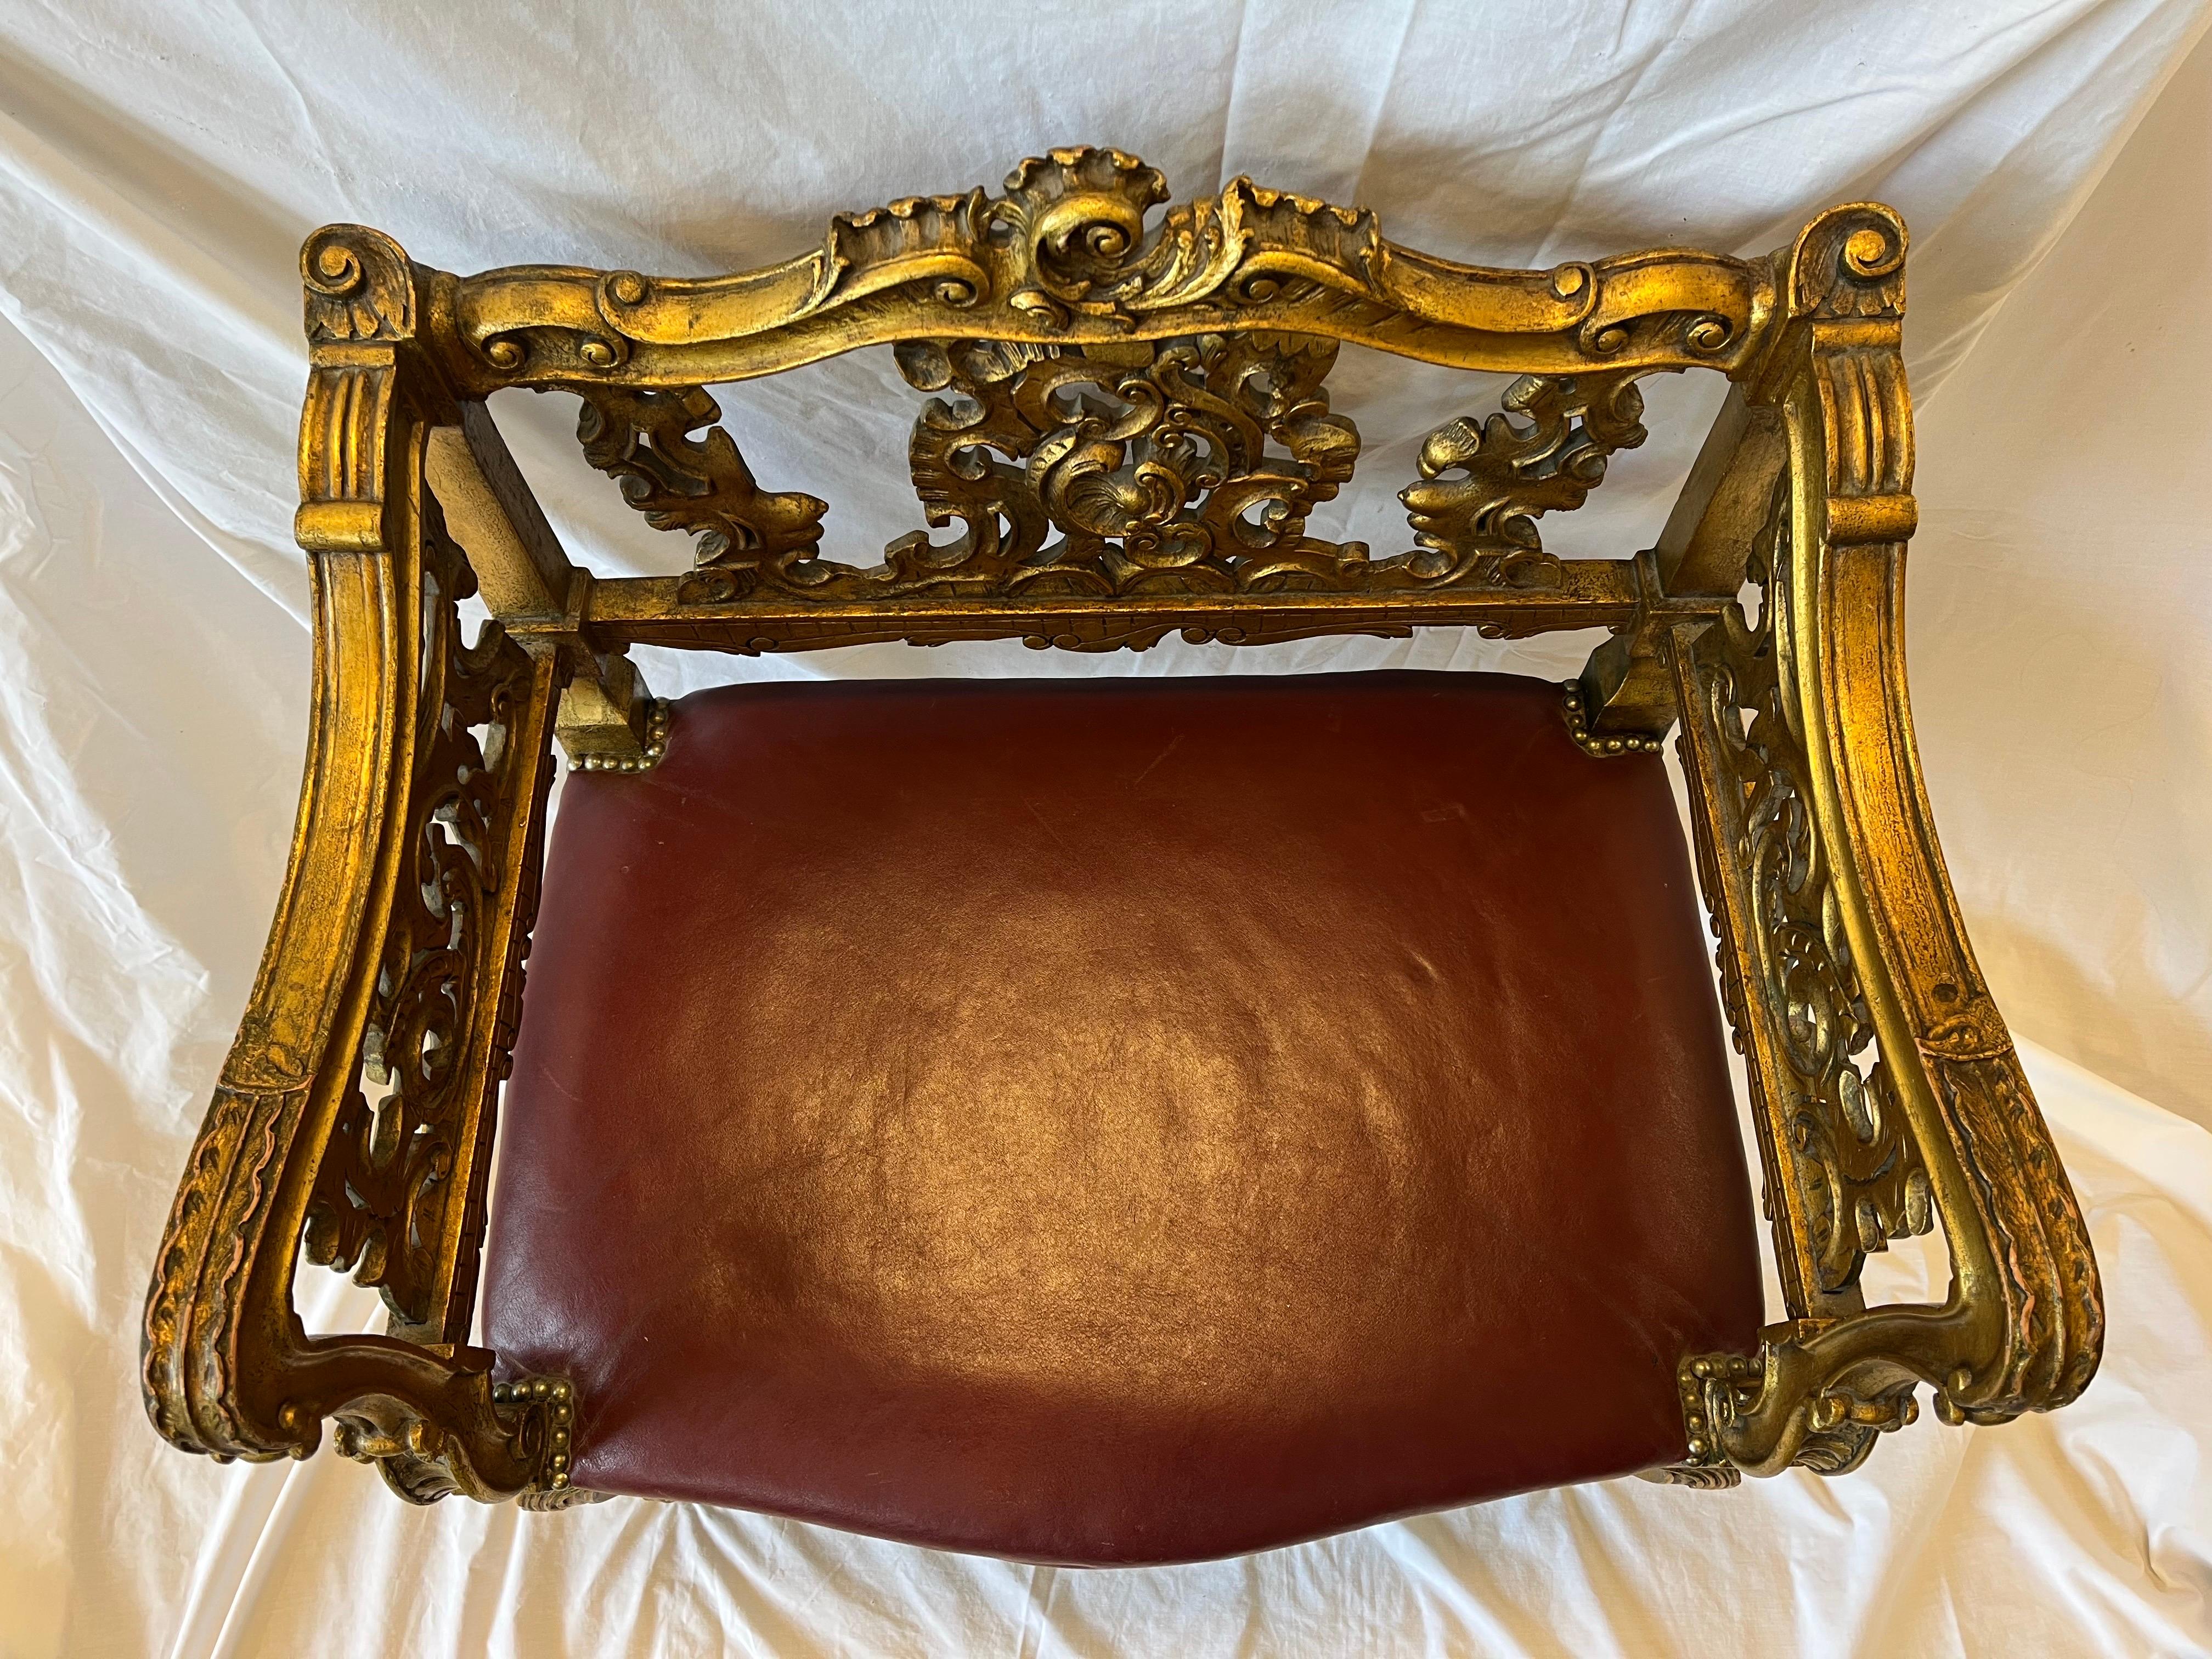 Antique Carved and Gilt Wood Arm Chair Bench Ornate Design Red Upholstered Seat For Sale 3